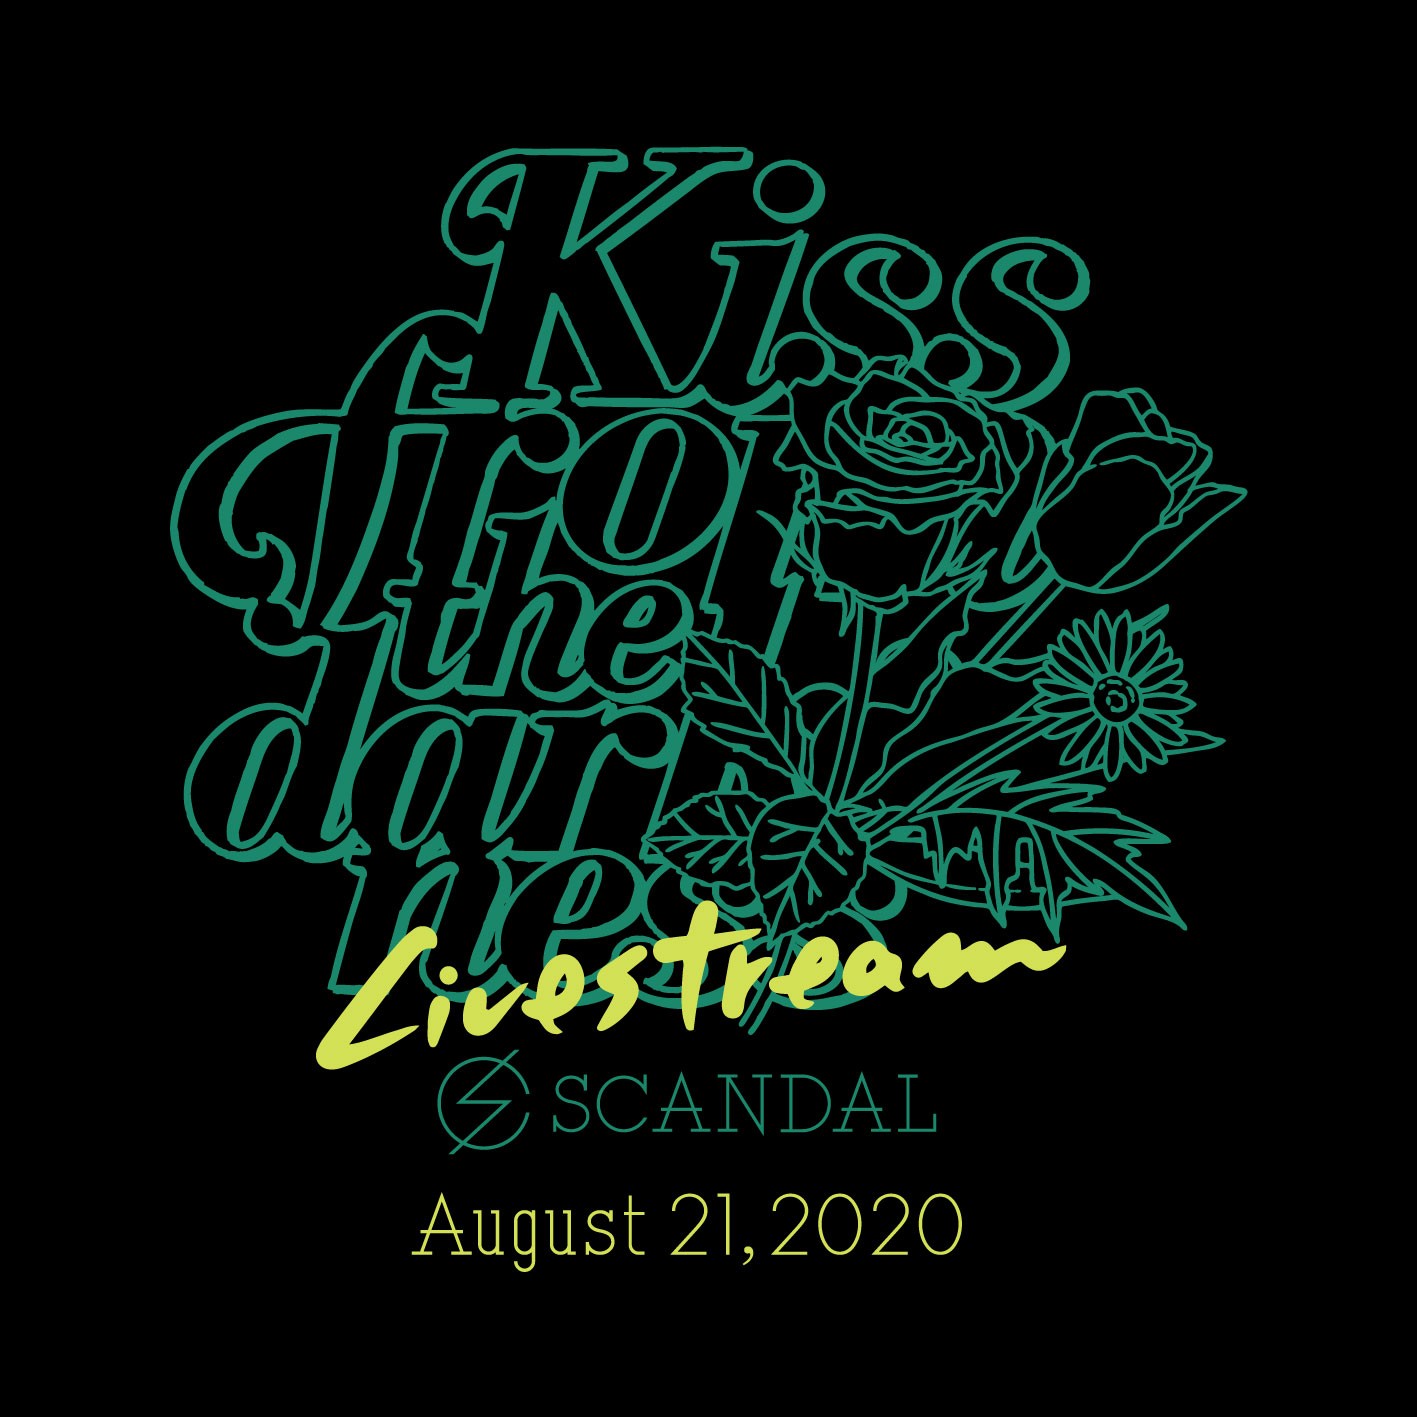 SCANDAL - SCANDAL WORLD TOUR 2020 “Kiss from the darkness” Livestream - 2020.8.21 [MP4 1080p]